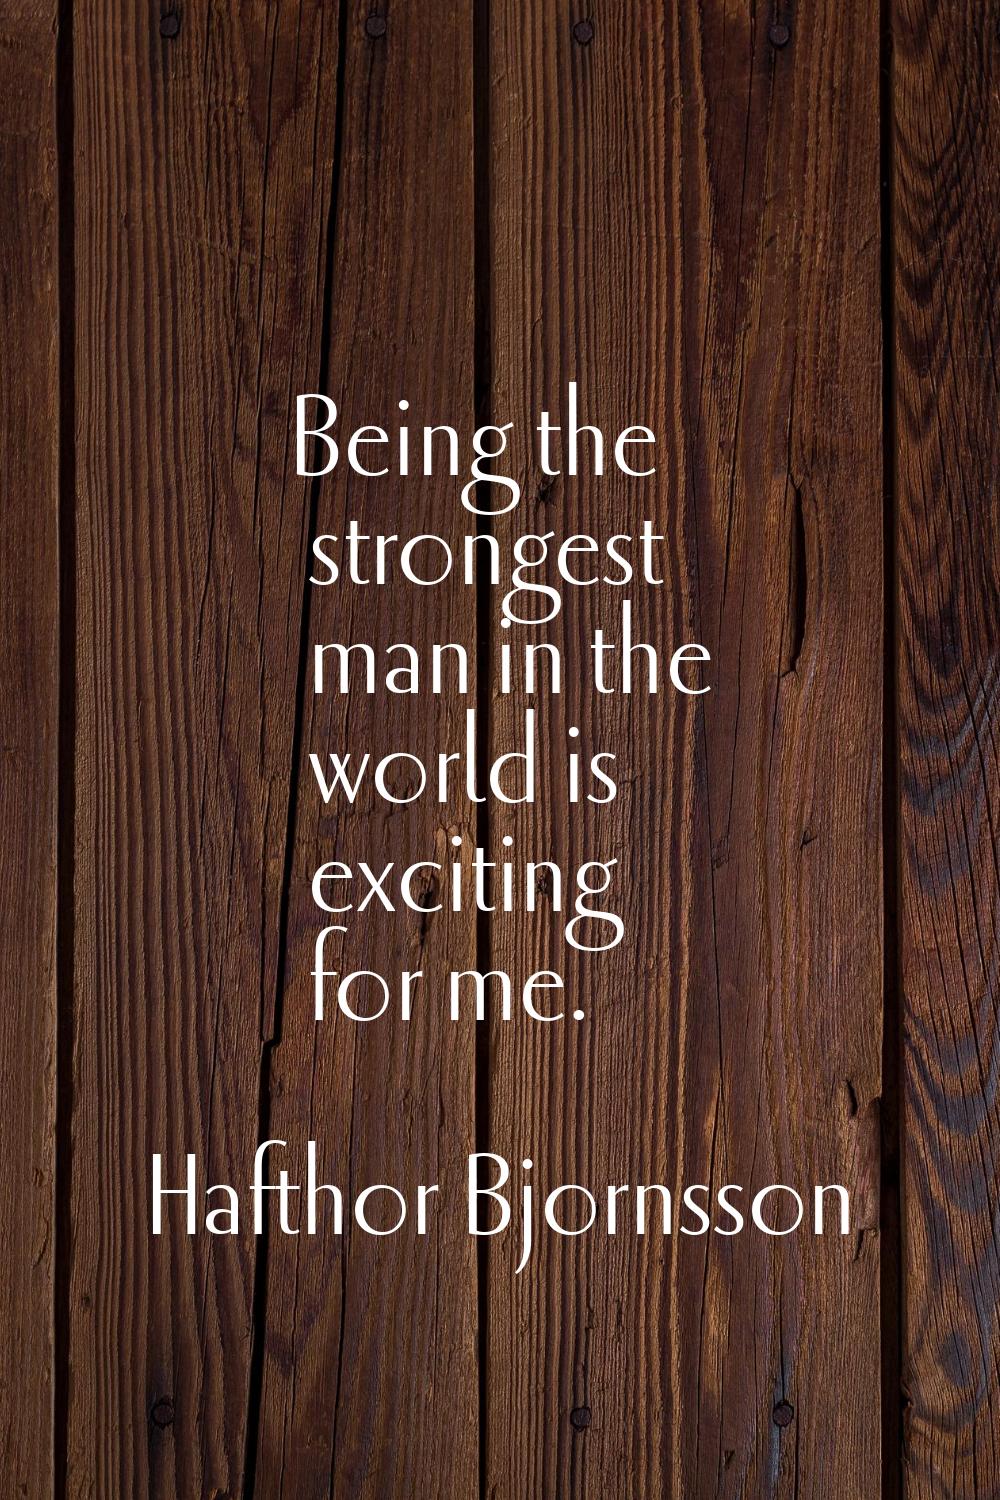 Being the strongest man in the world is exciting for me.